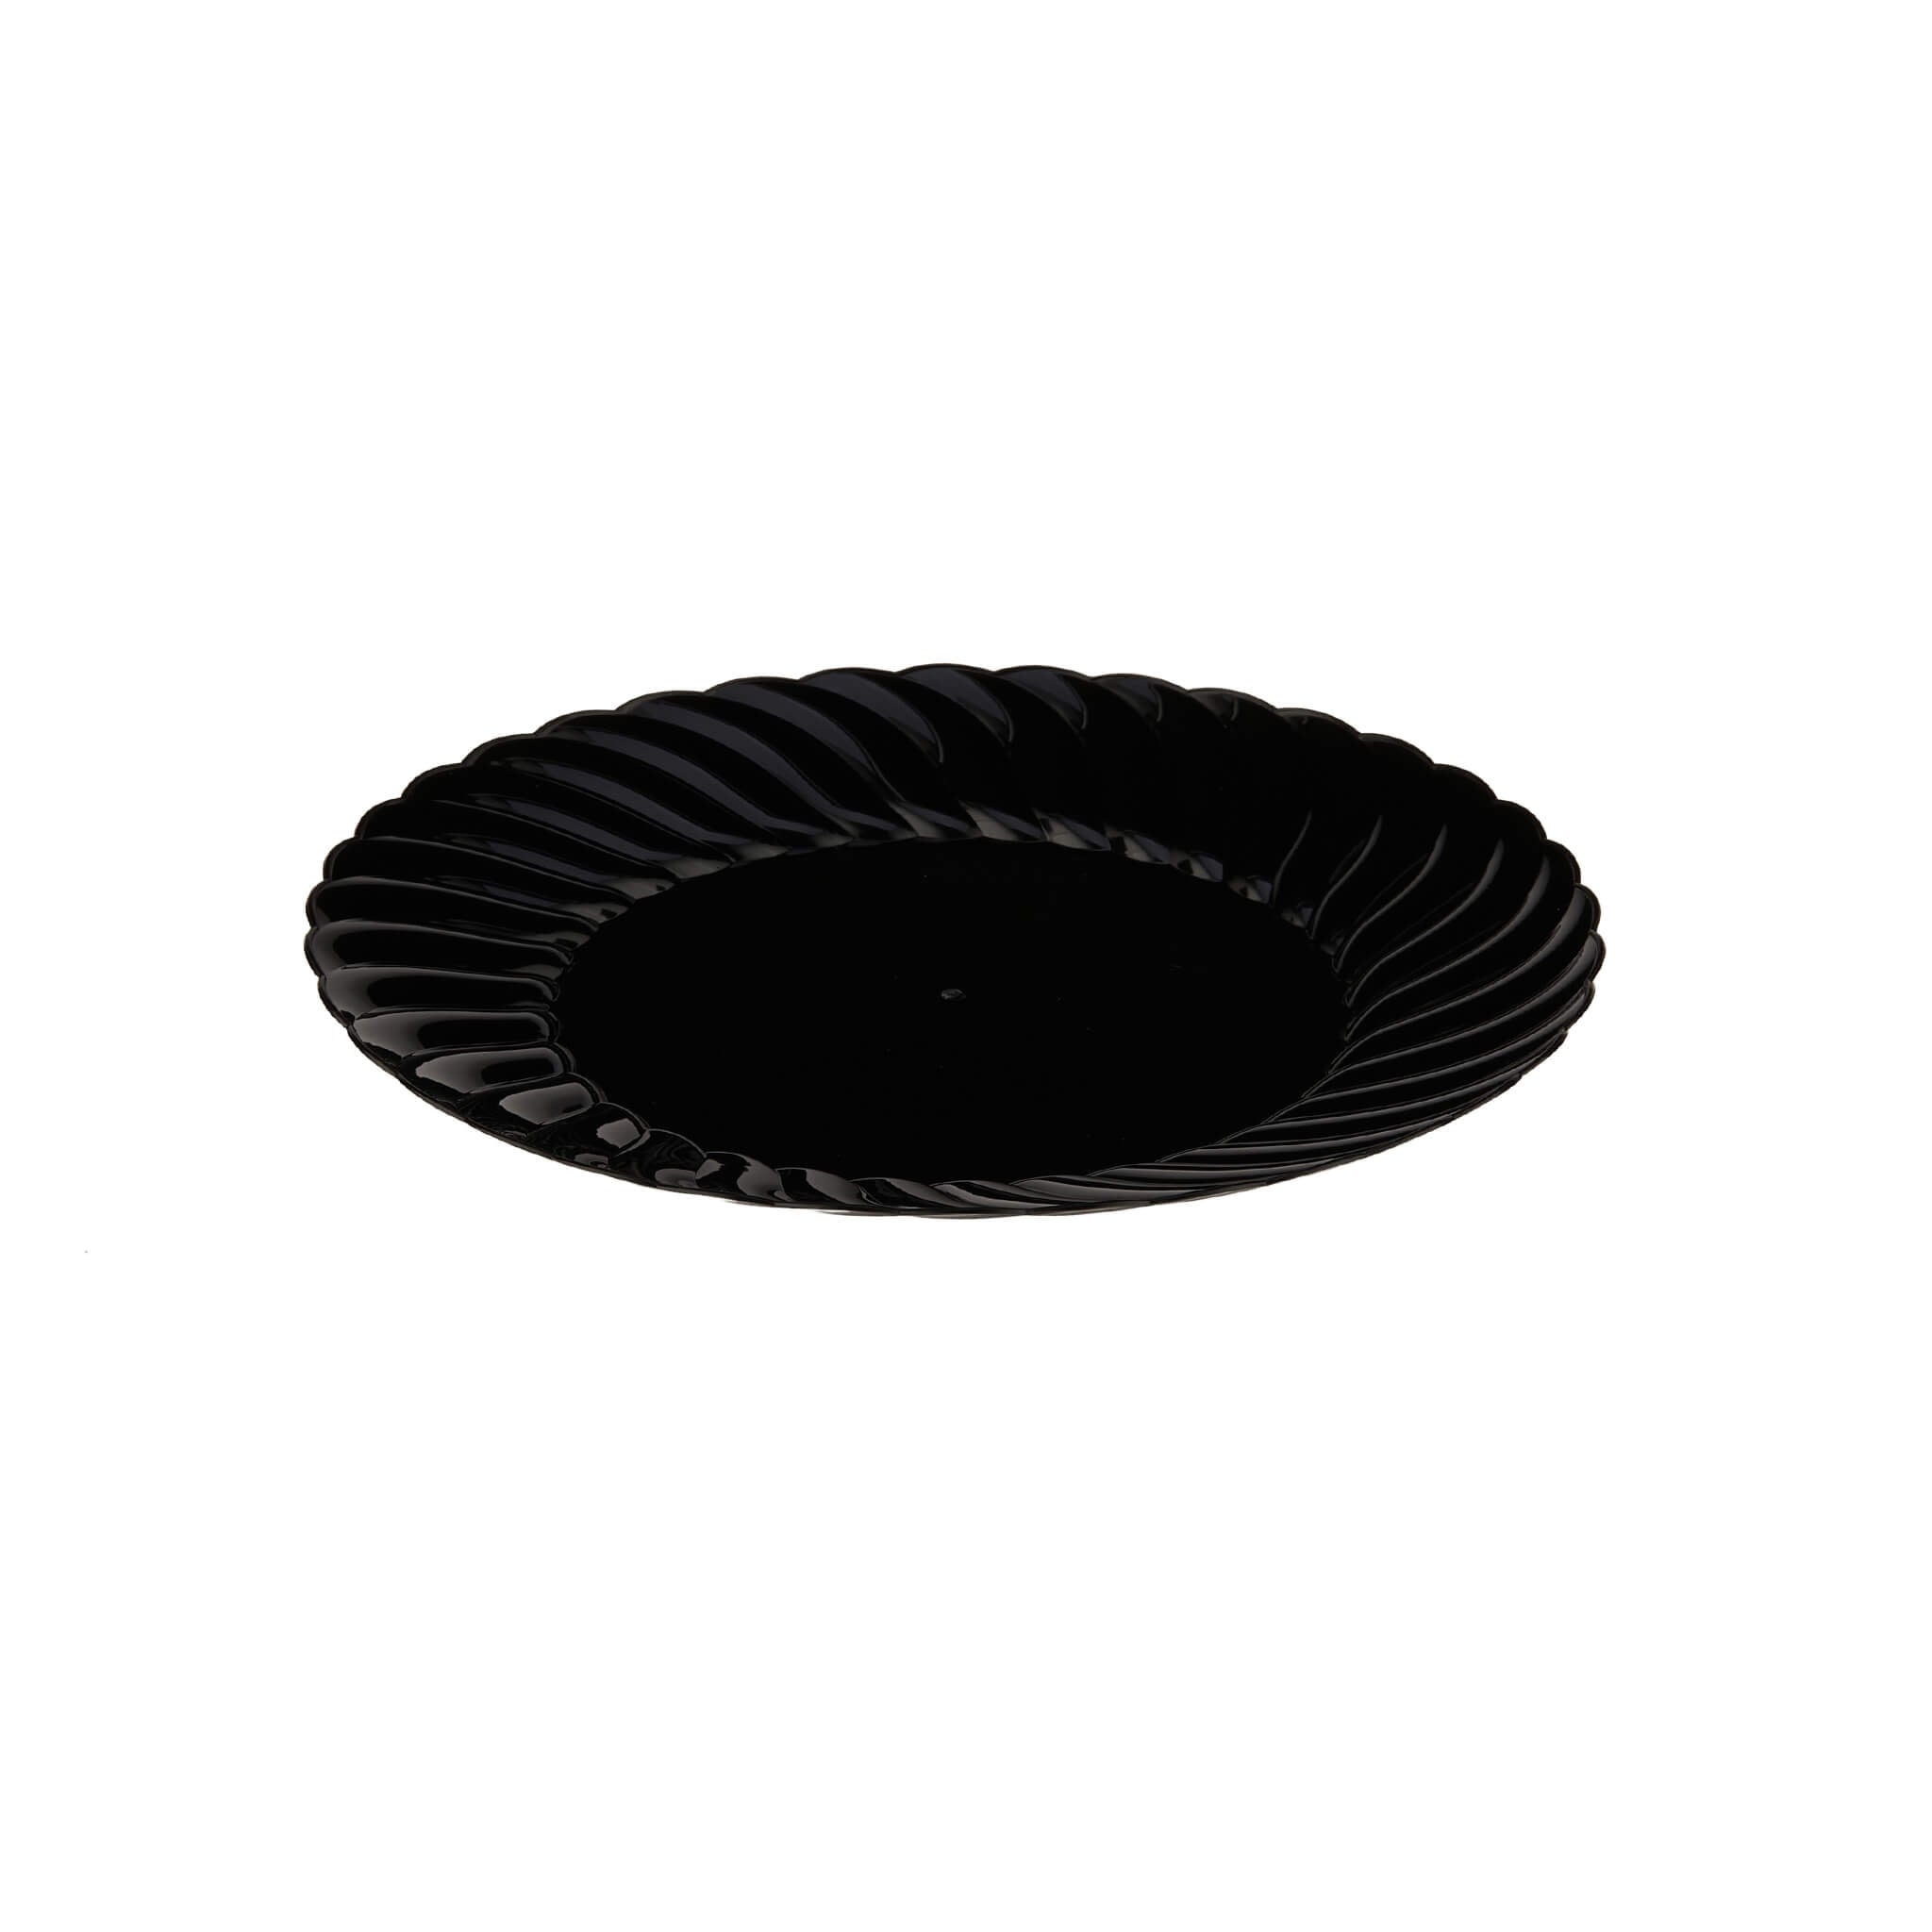 6 Inch Paper Plates at Rs 13.00/piece